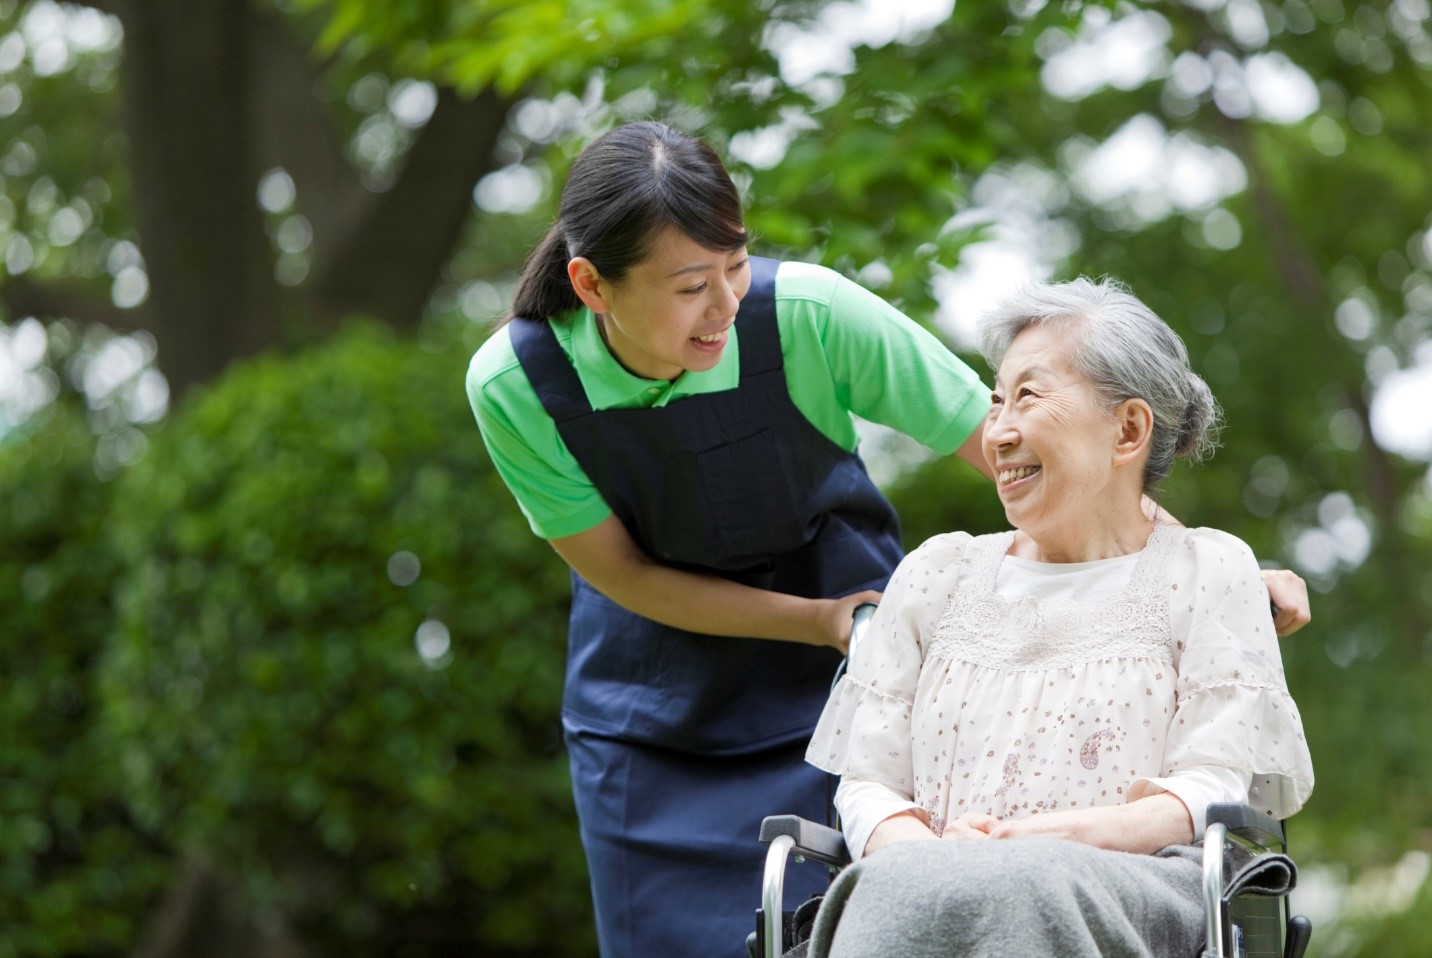 Home care aide serves an elderly person with care and respect in Westwood and Norwood, MA